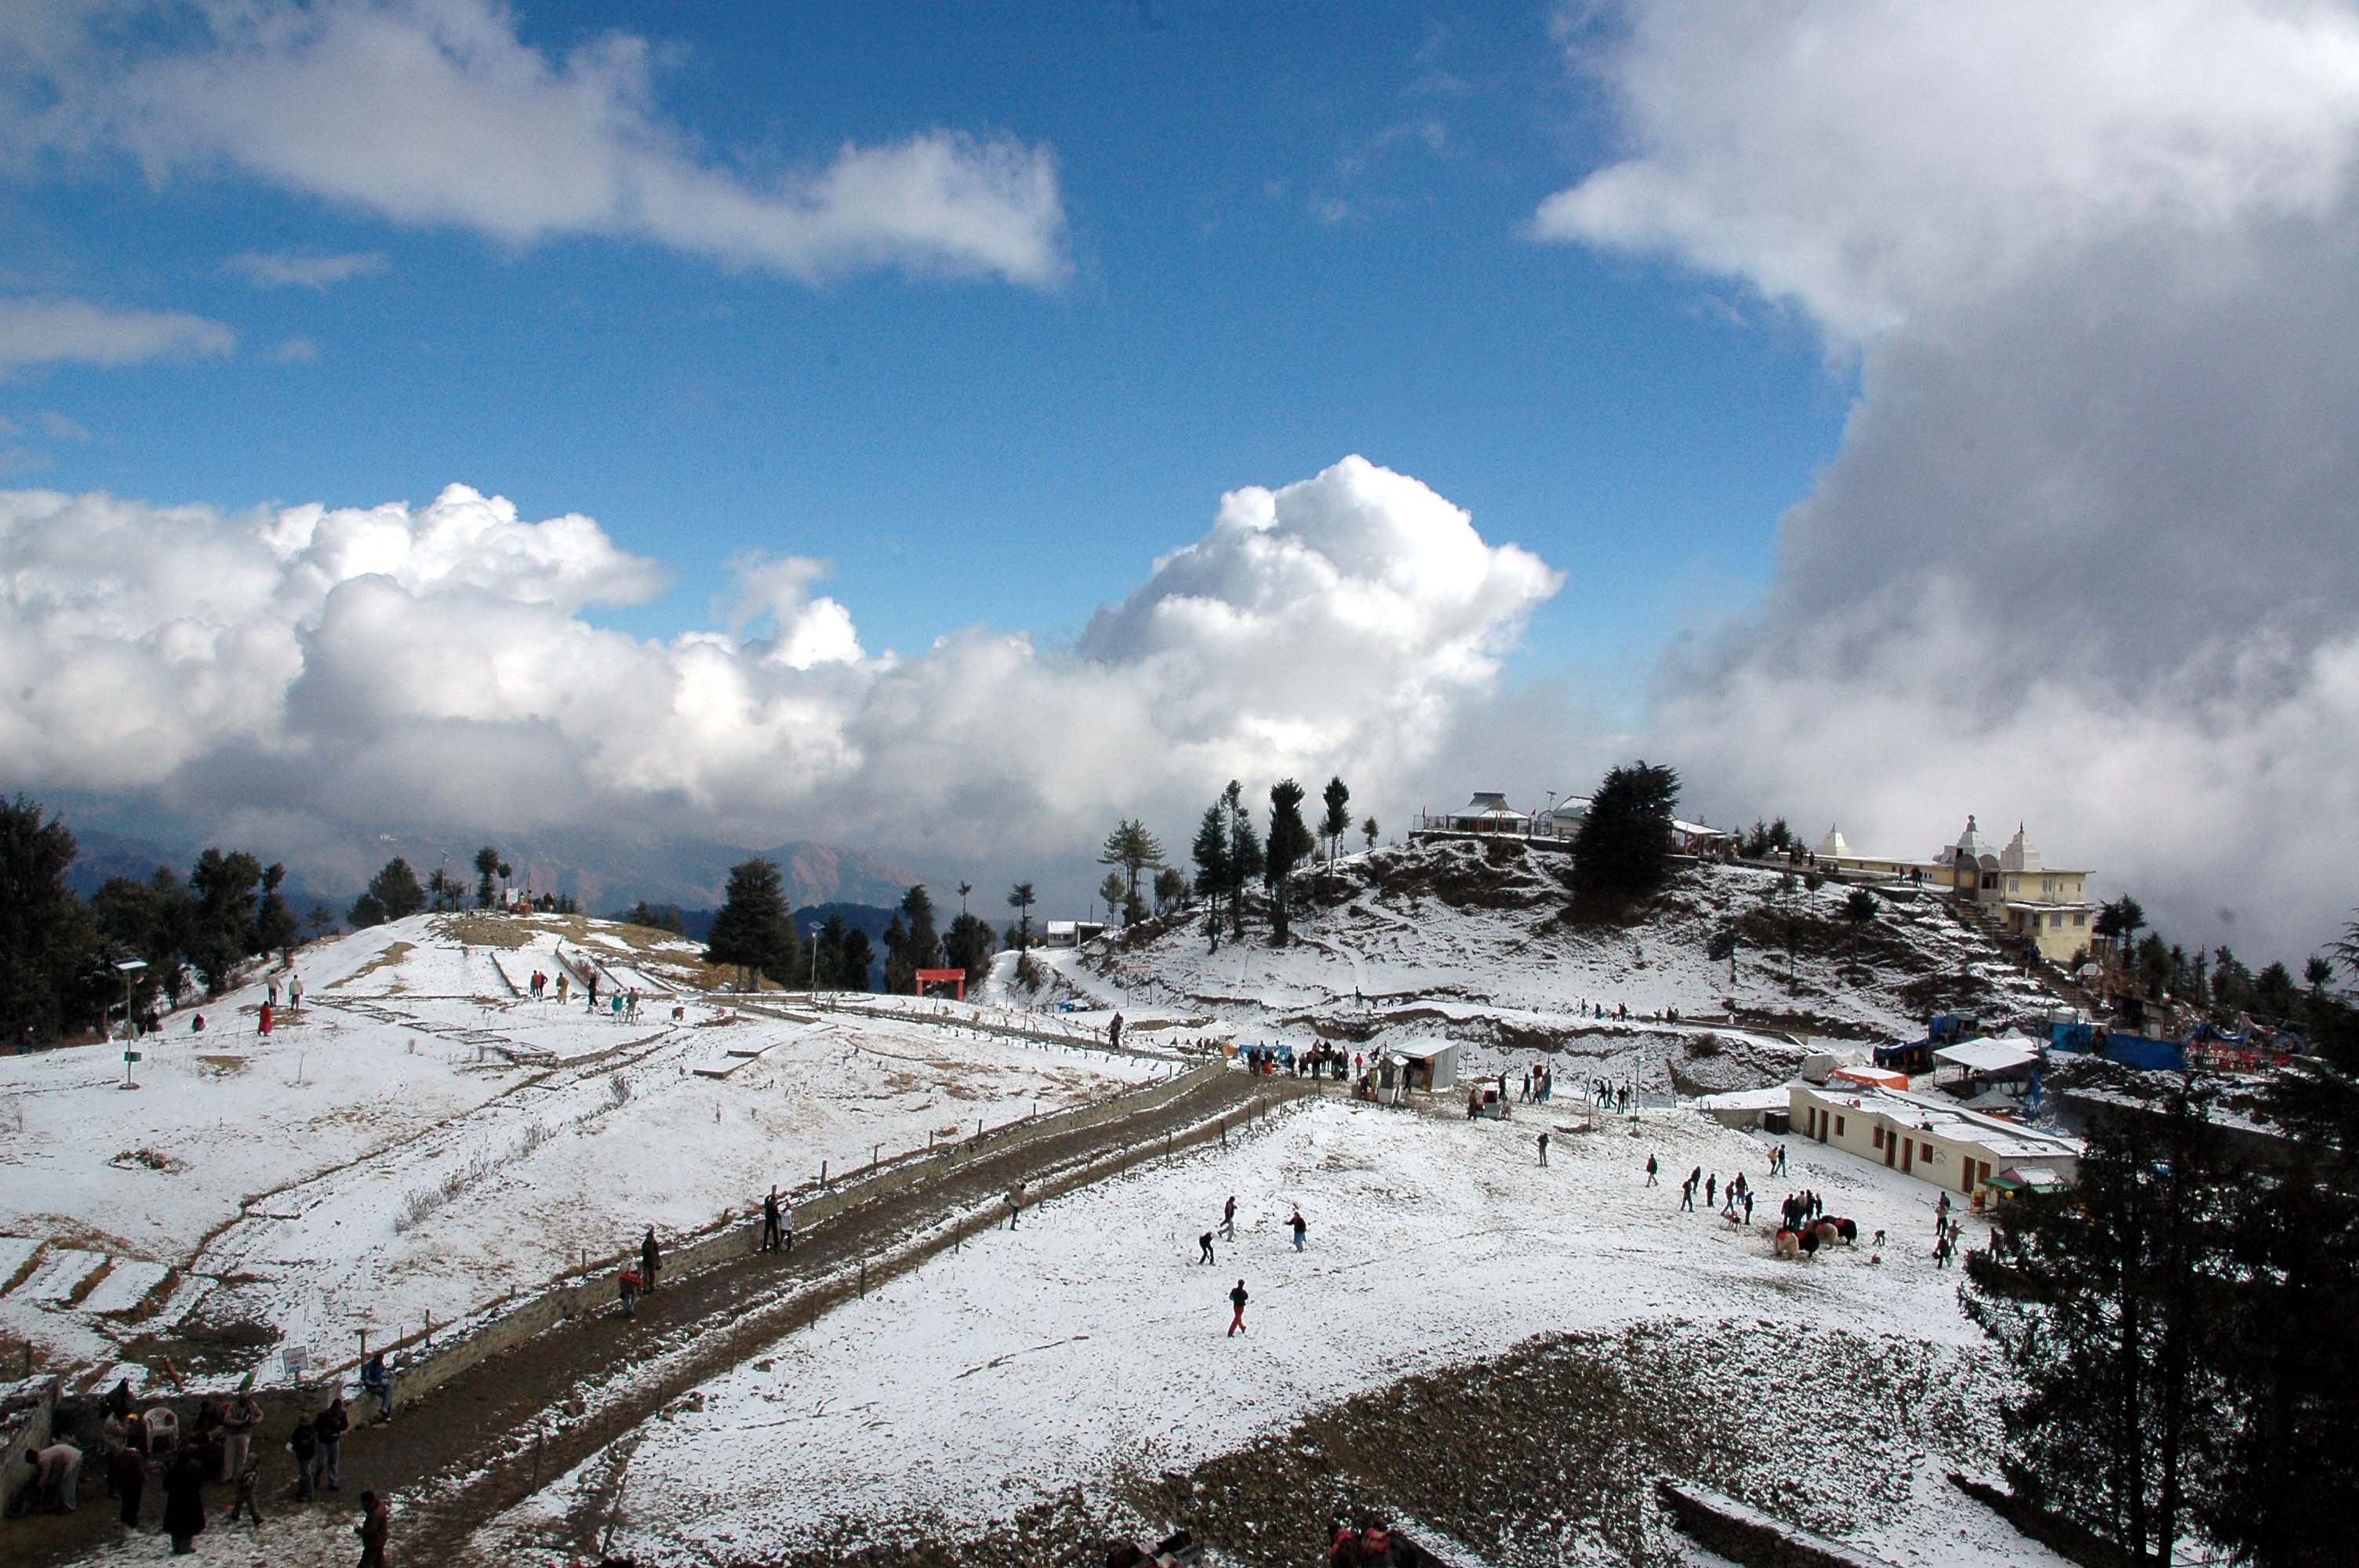 Sunny day brings relief from cold in Himachal